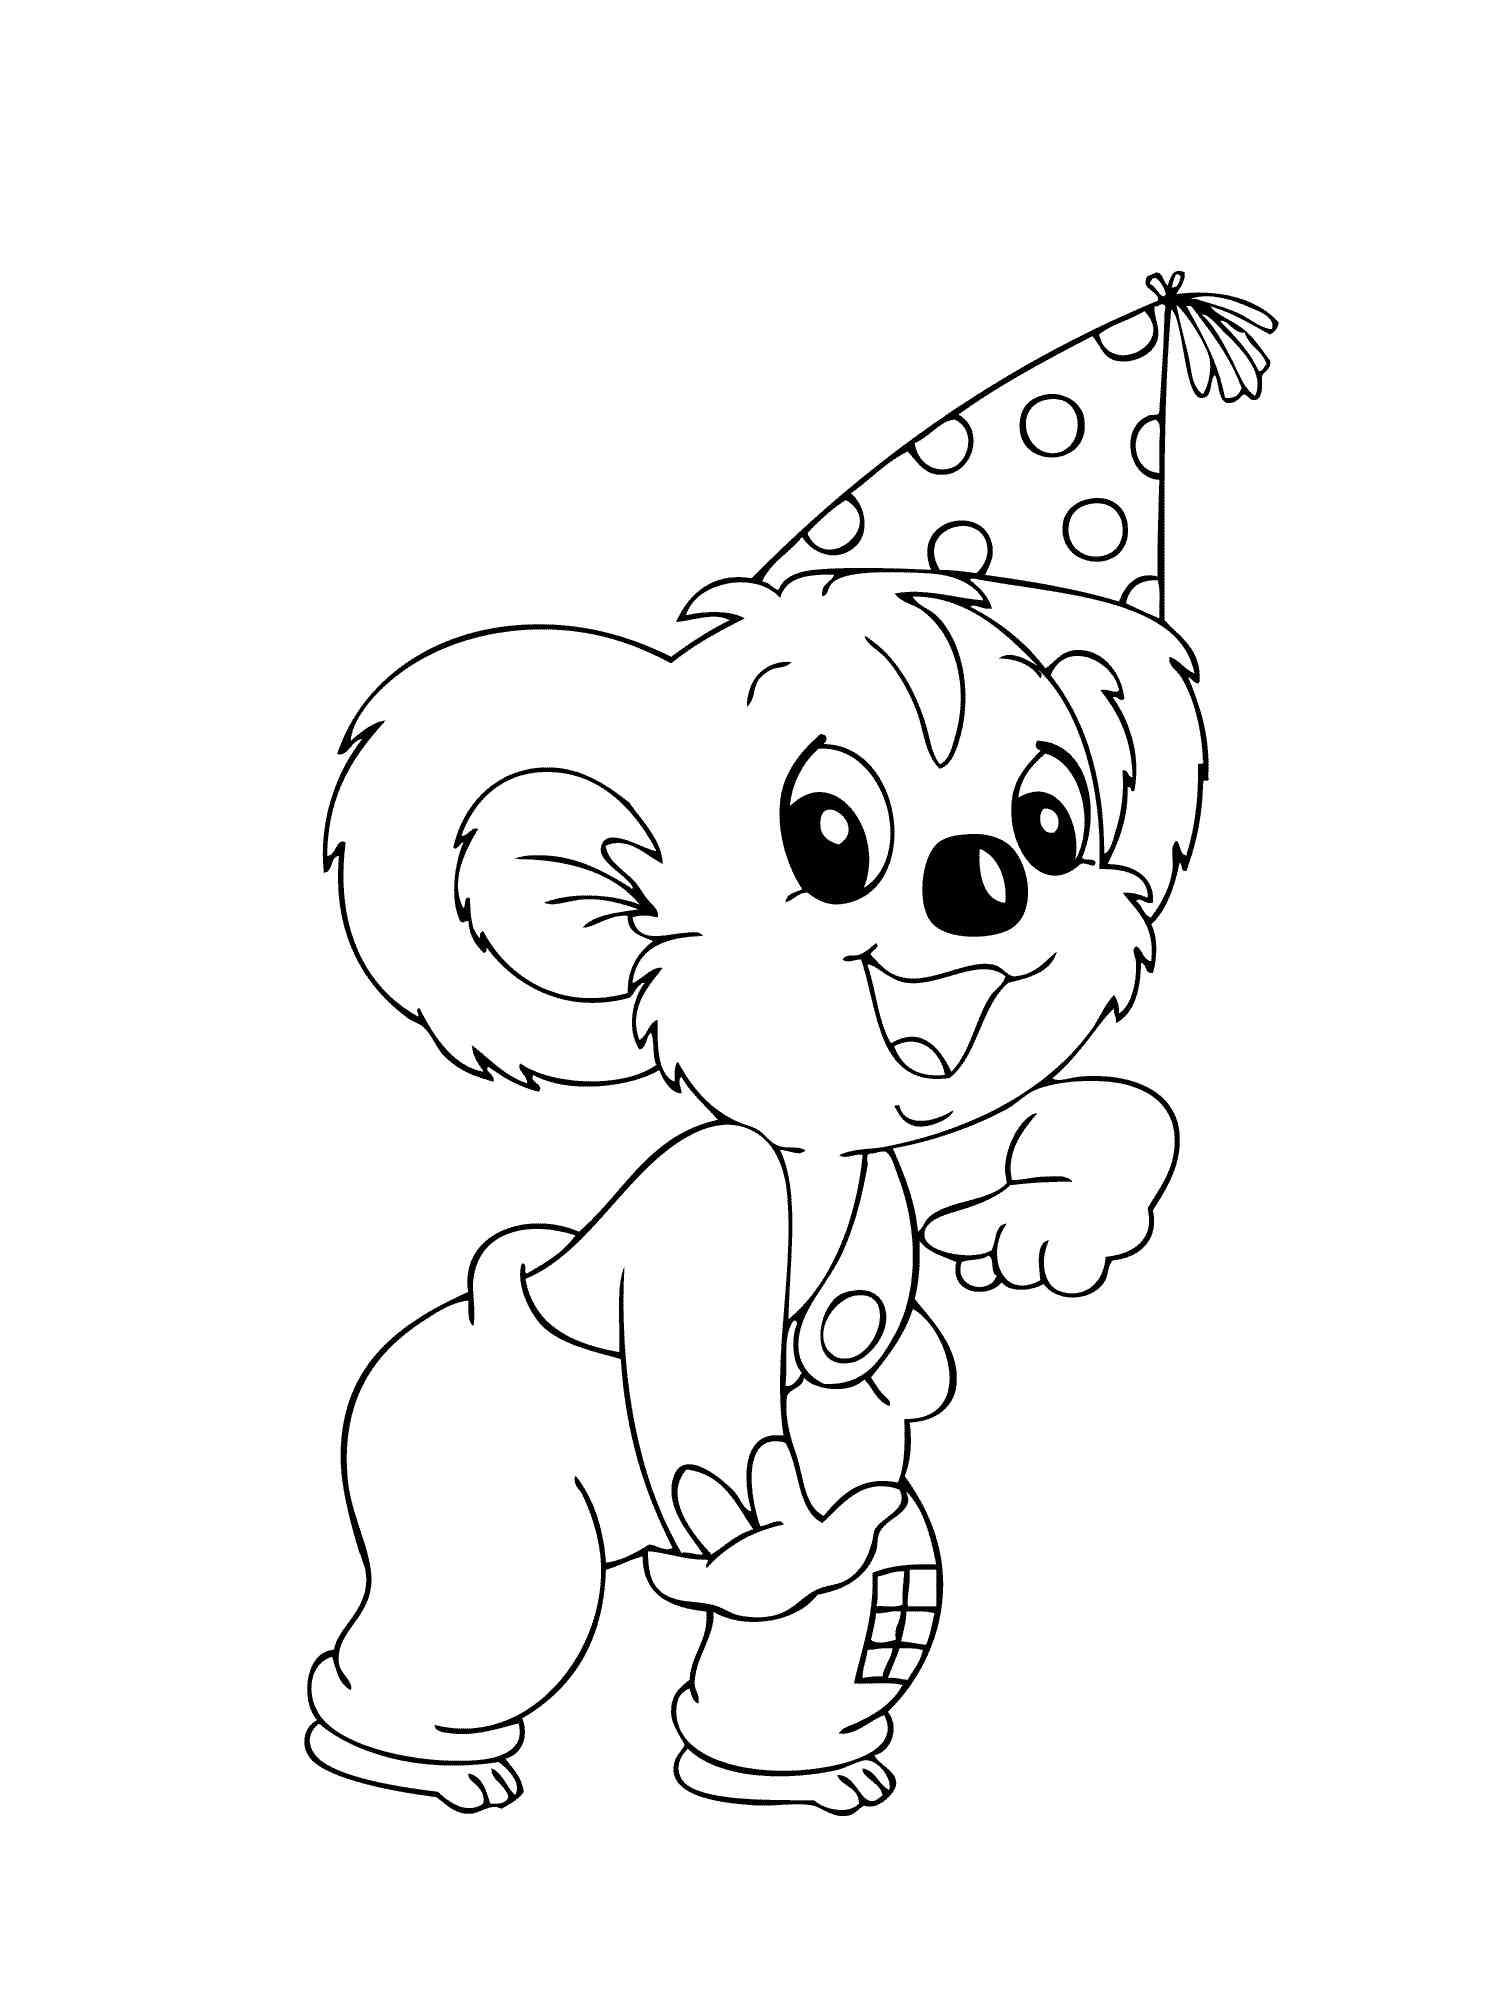 Blinky Bill 15 coloring page